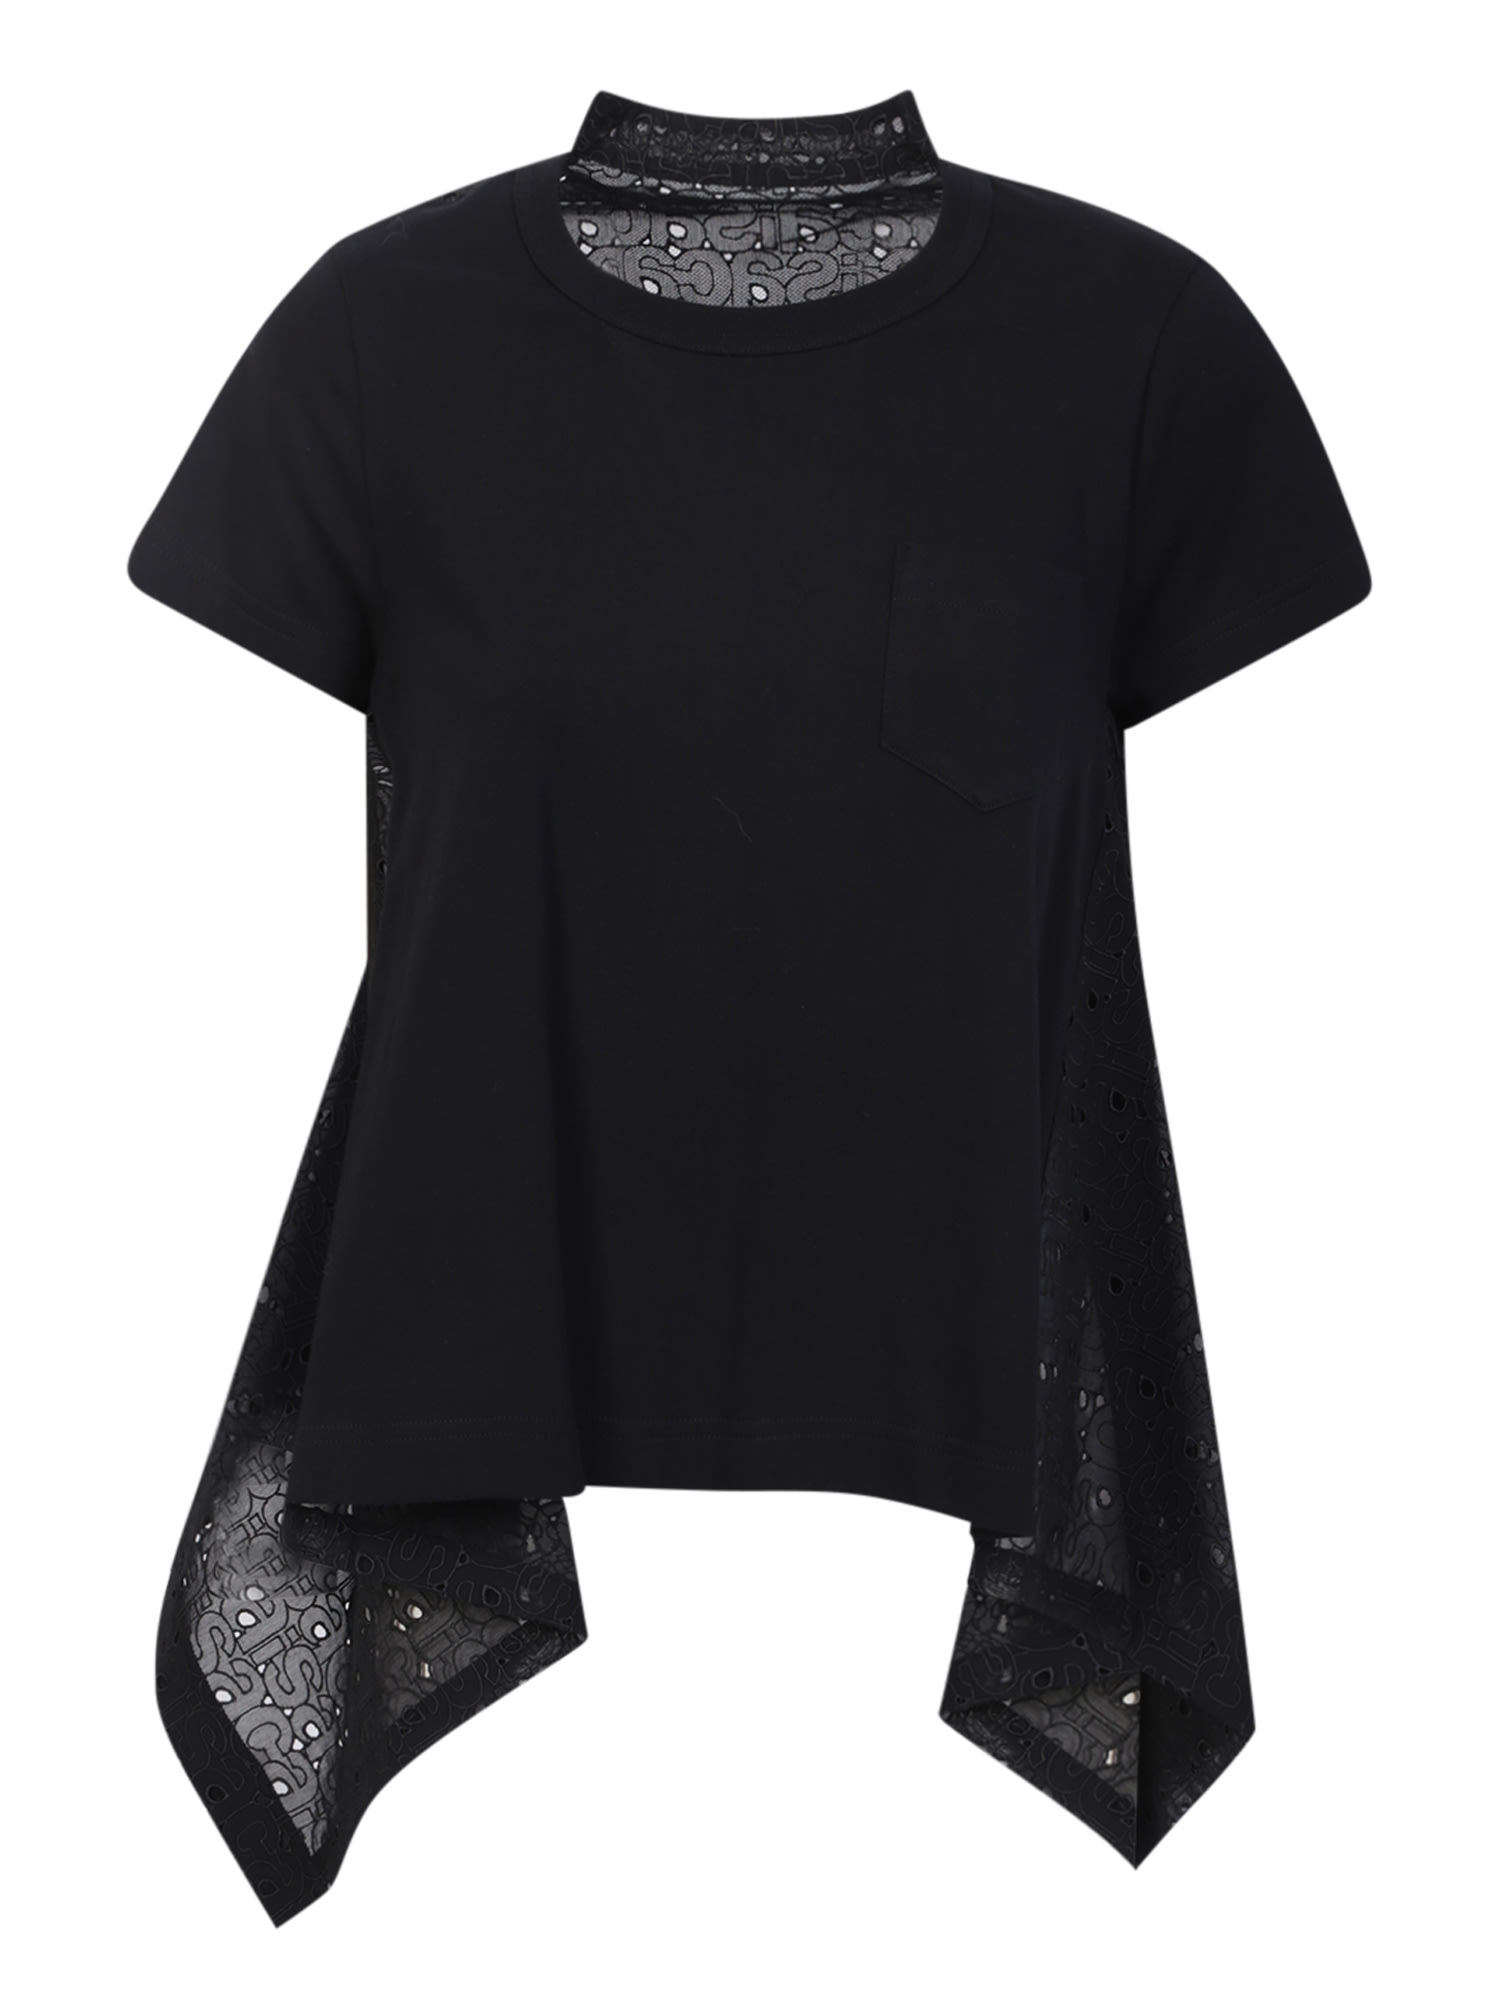 SACAI EMBROIDERED LACE BLACK T-SHIRT